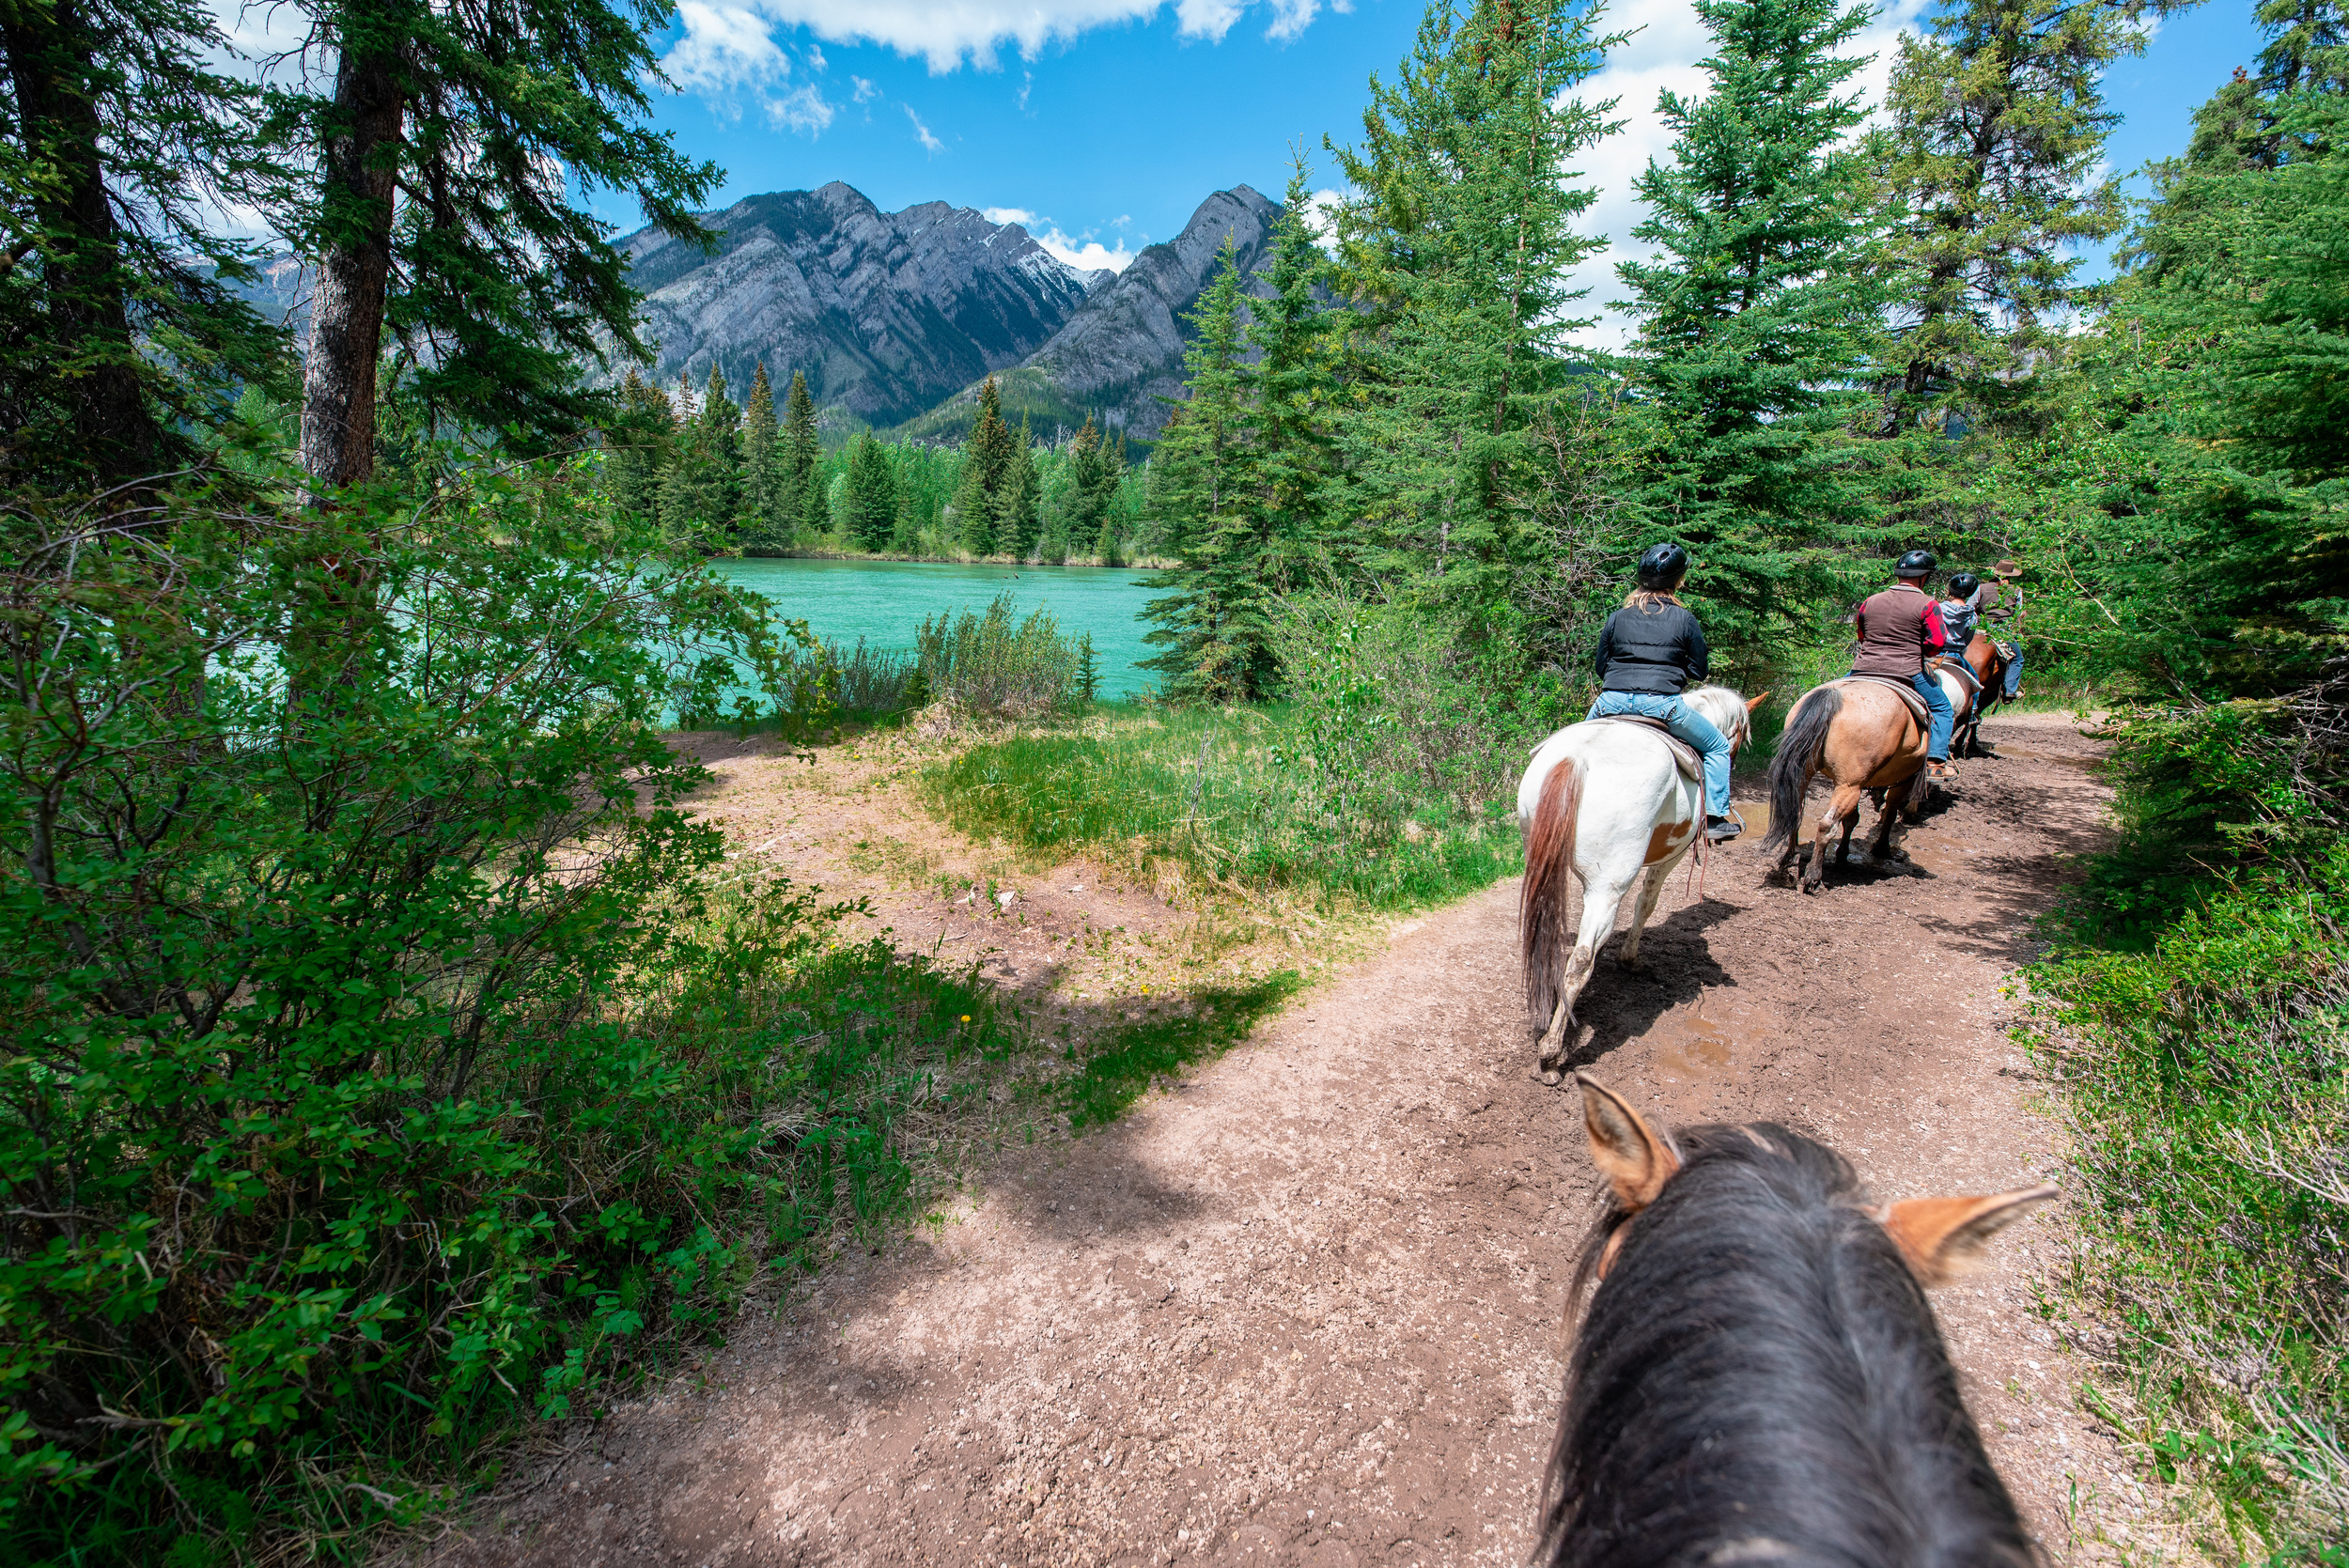 <p>Most people hike or ski in Canada’s world-class mountains. But if you’re up for something a bit different, numerous Alberta and British Columbia ranches offer amazing vacation packages. You can take a quick trail ride, overnight camp, or even have the full farm experience and stay a week on site!</p><p>You may also like: <a href='https://www.yardbarker.com/lifestyle/articles/these_20_vegetables_are_best_eaten_in_spring/s1__40253251'>These 20 vegetables are best eaten in spring</a></p>